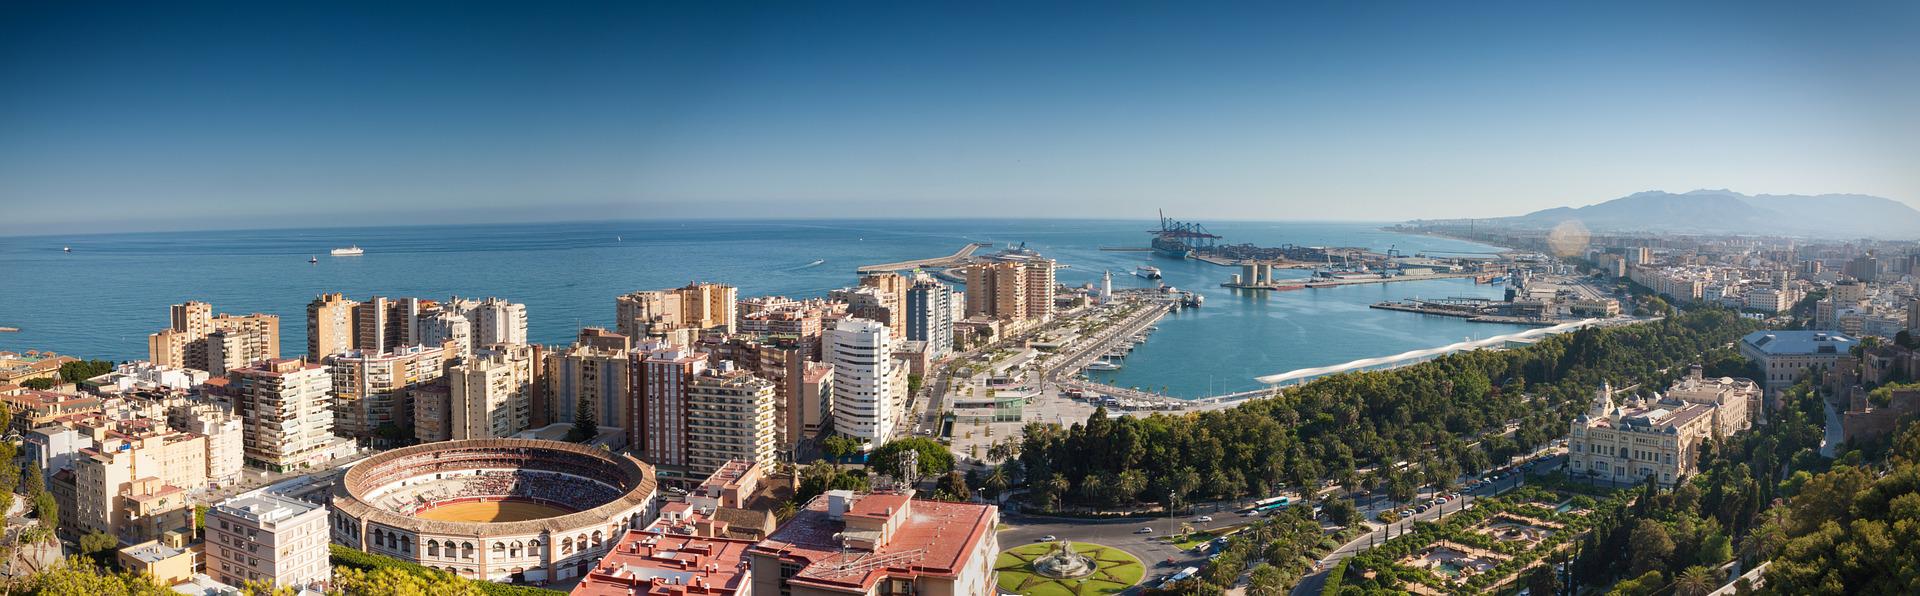 Fun facts and trivia about Spain’s Malaga you may not know